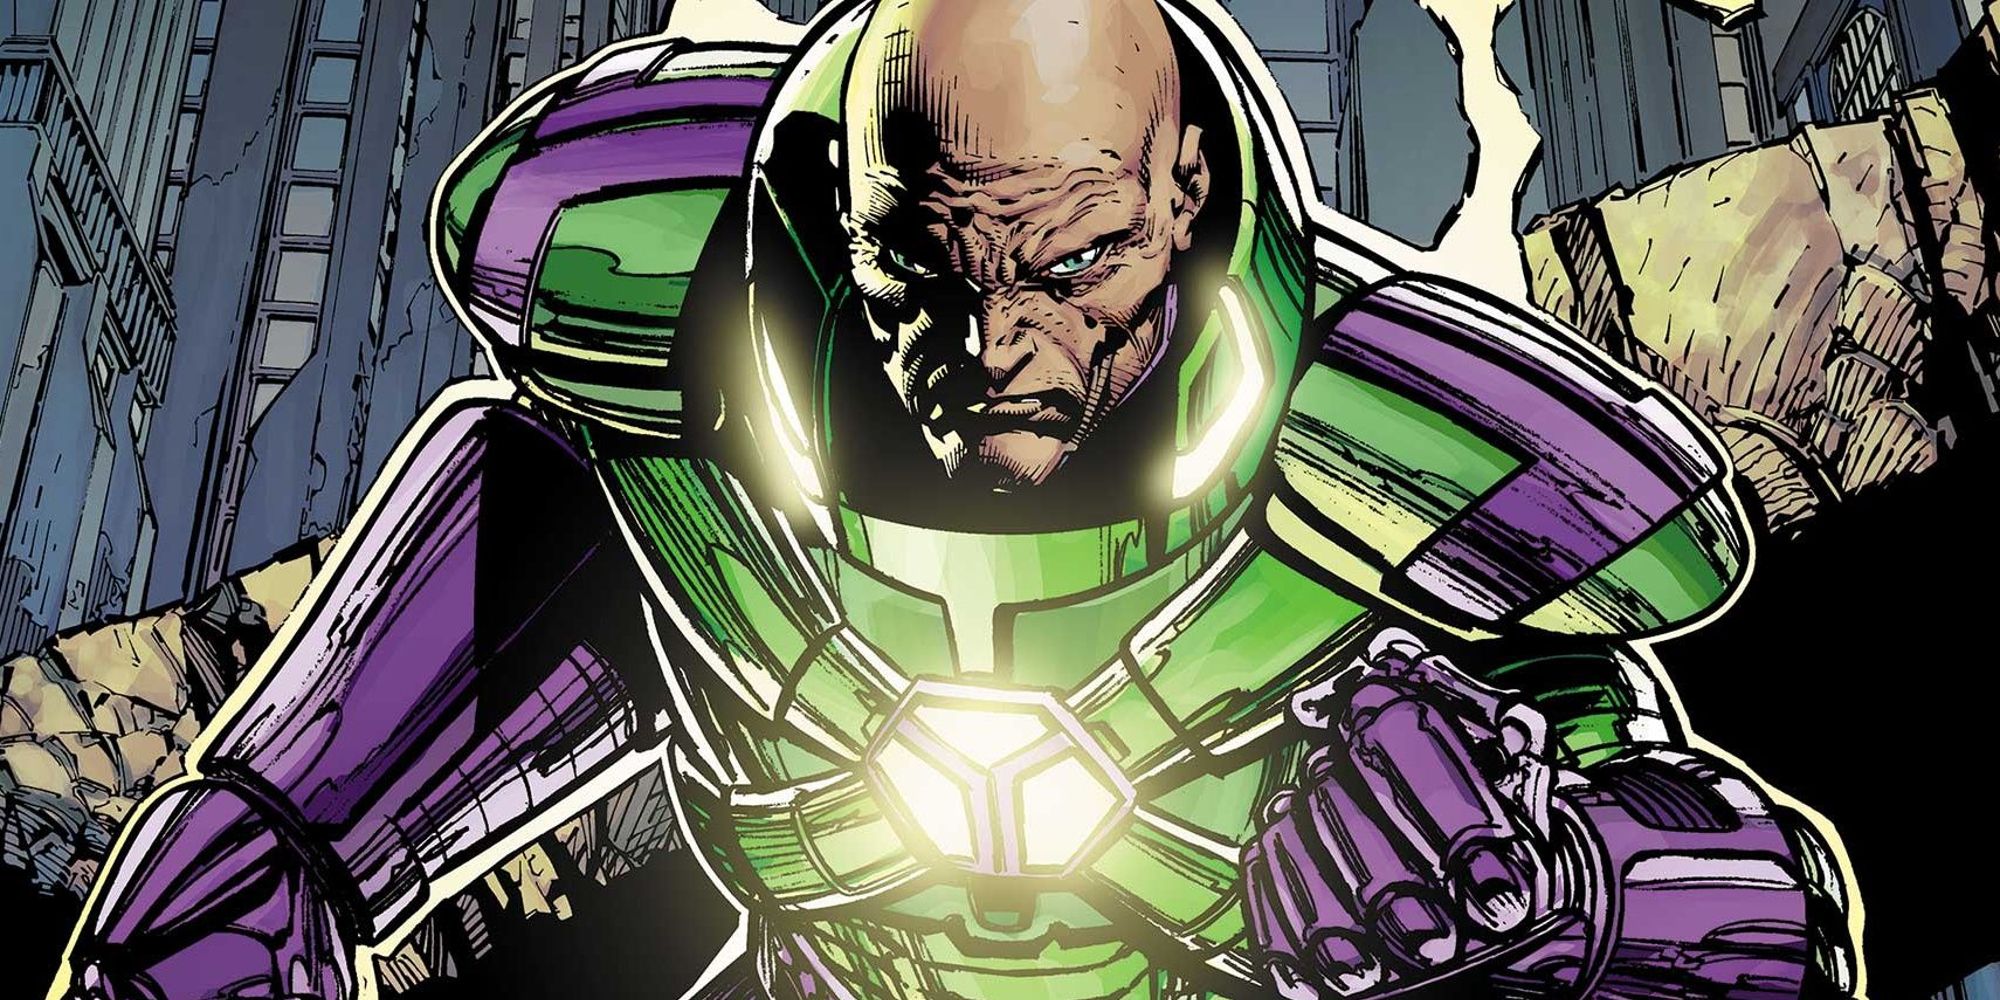 Lex Luthor ready for battle in his exosuit in DC Comics